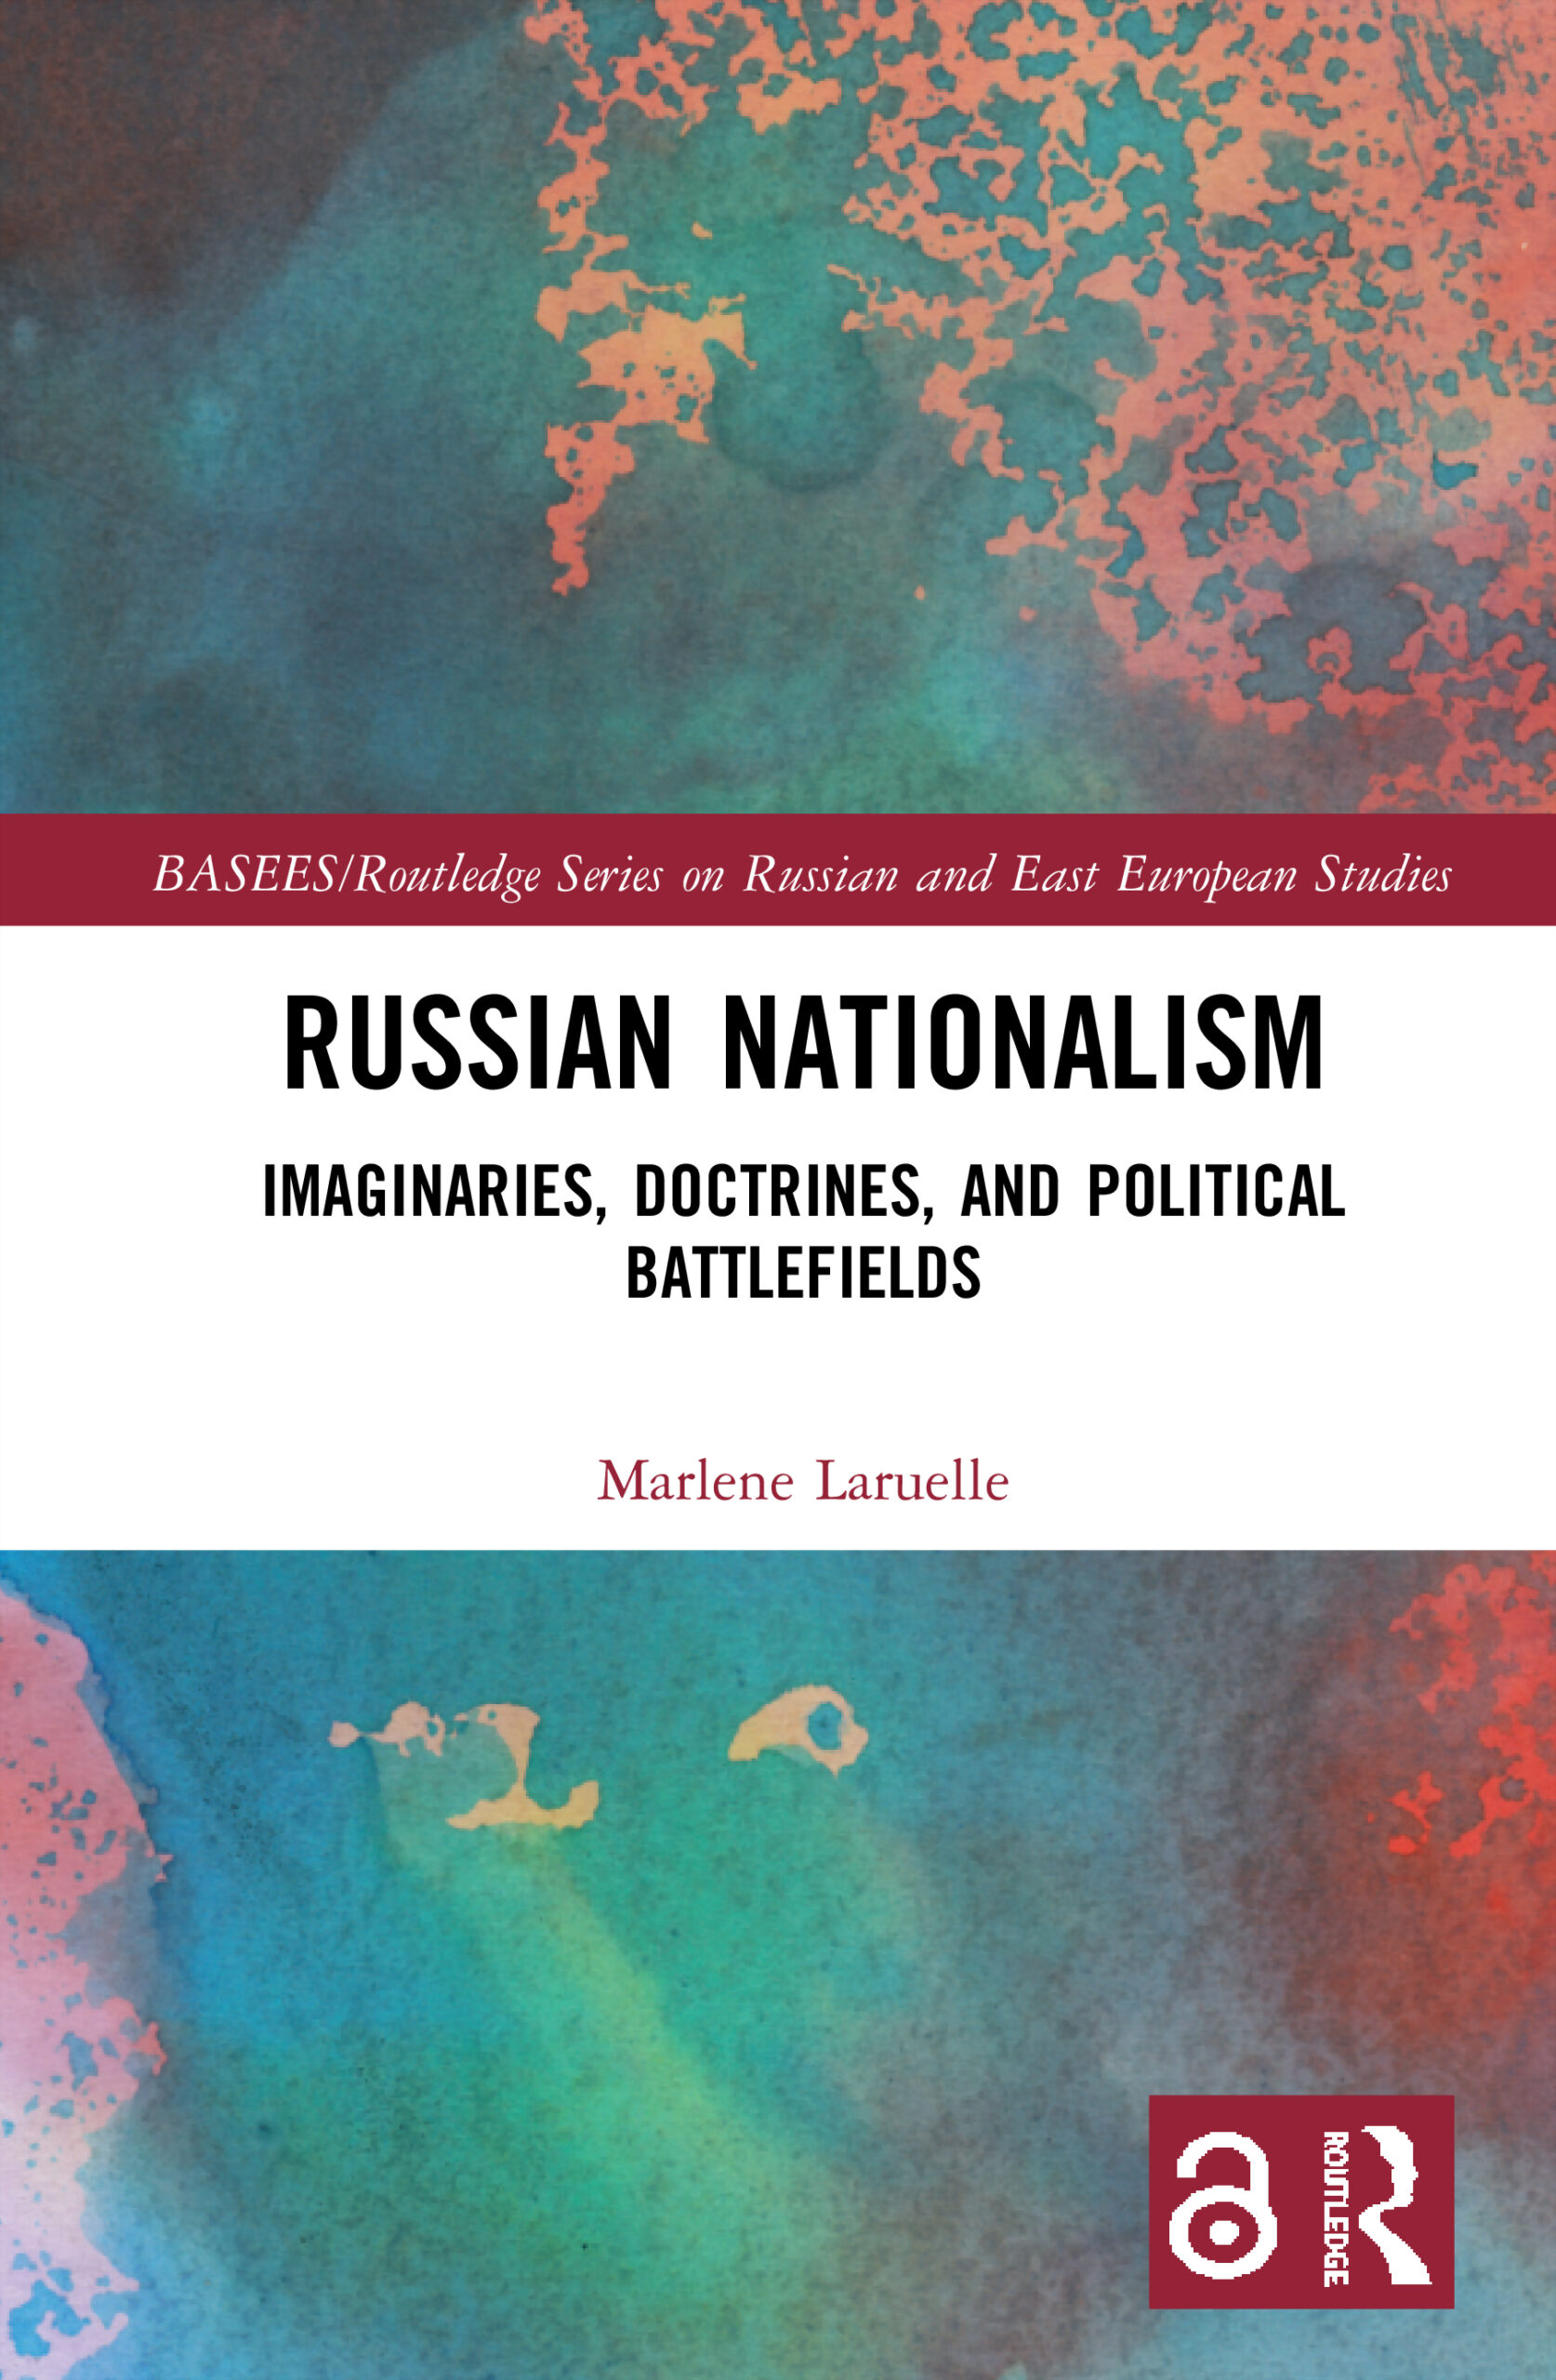 Russian Nationalism: Imaginaries, Doctrines and Political Battlefields